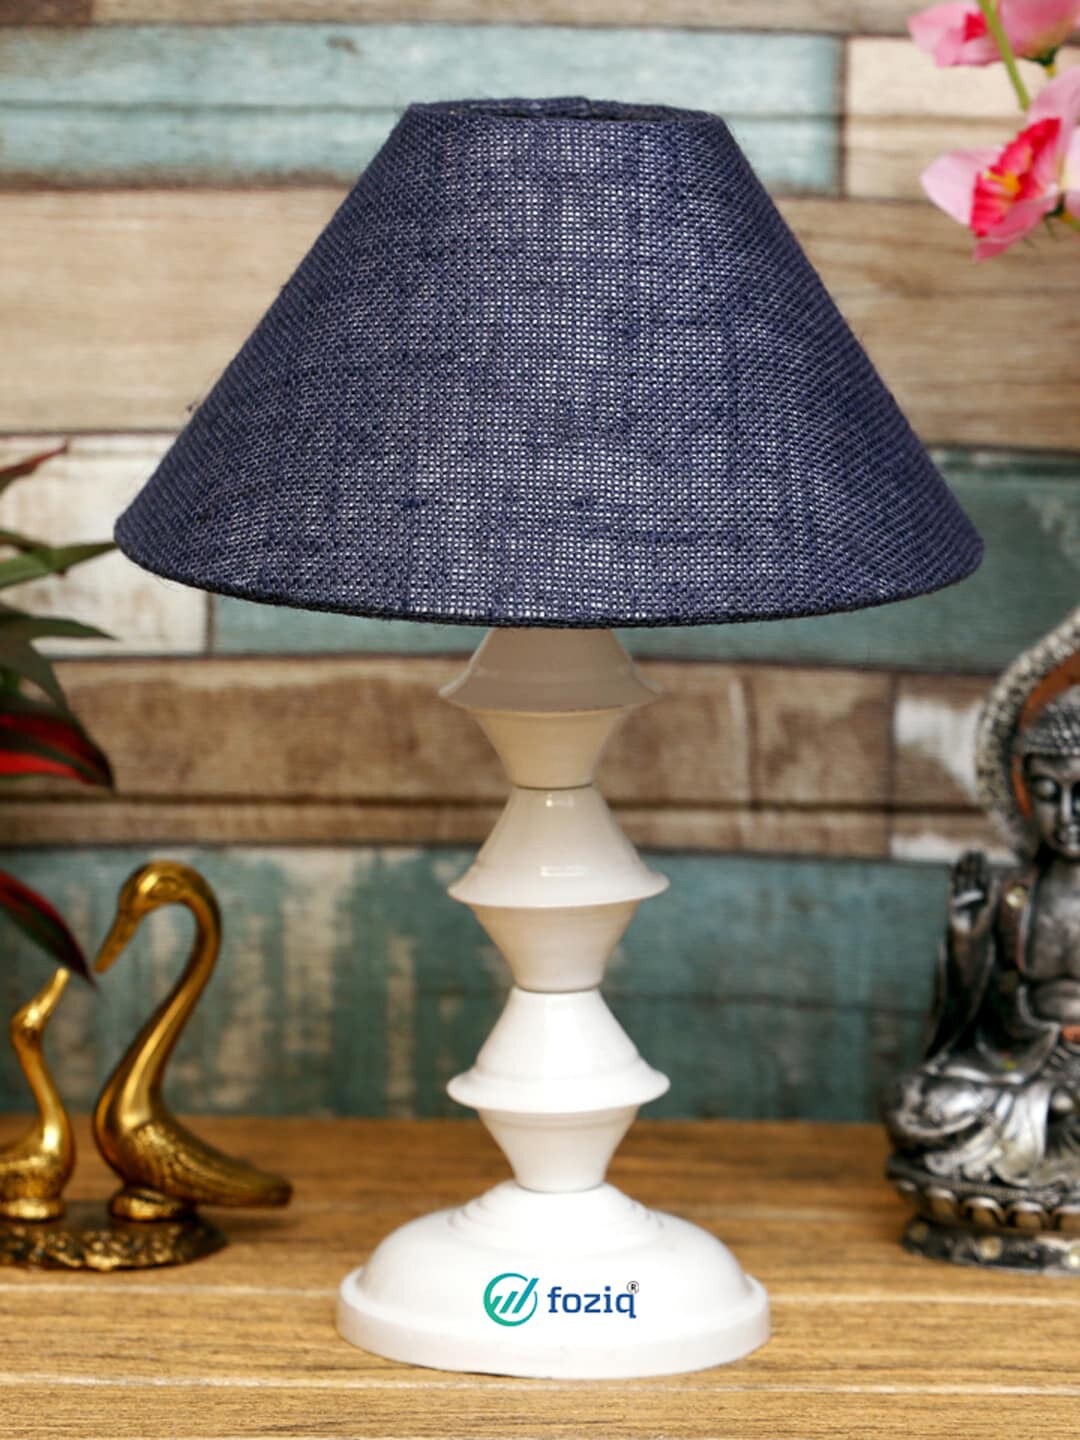 foziq White & Blue Textured Table Lamps Price in India